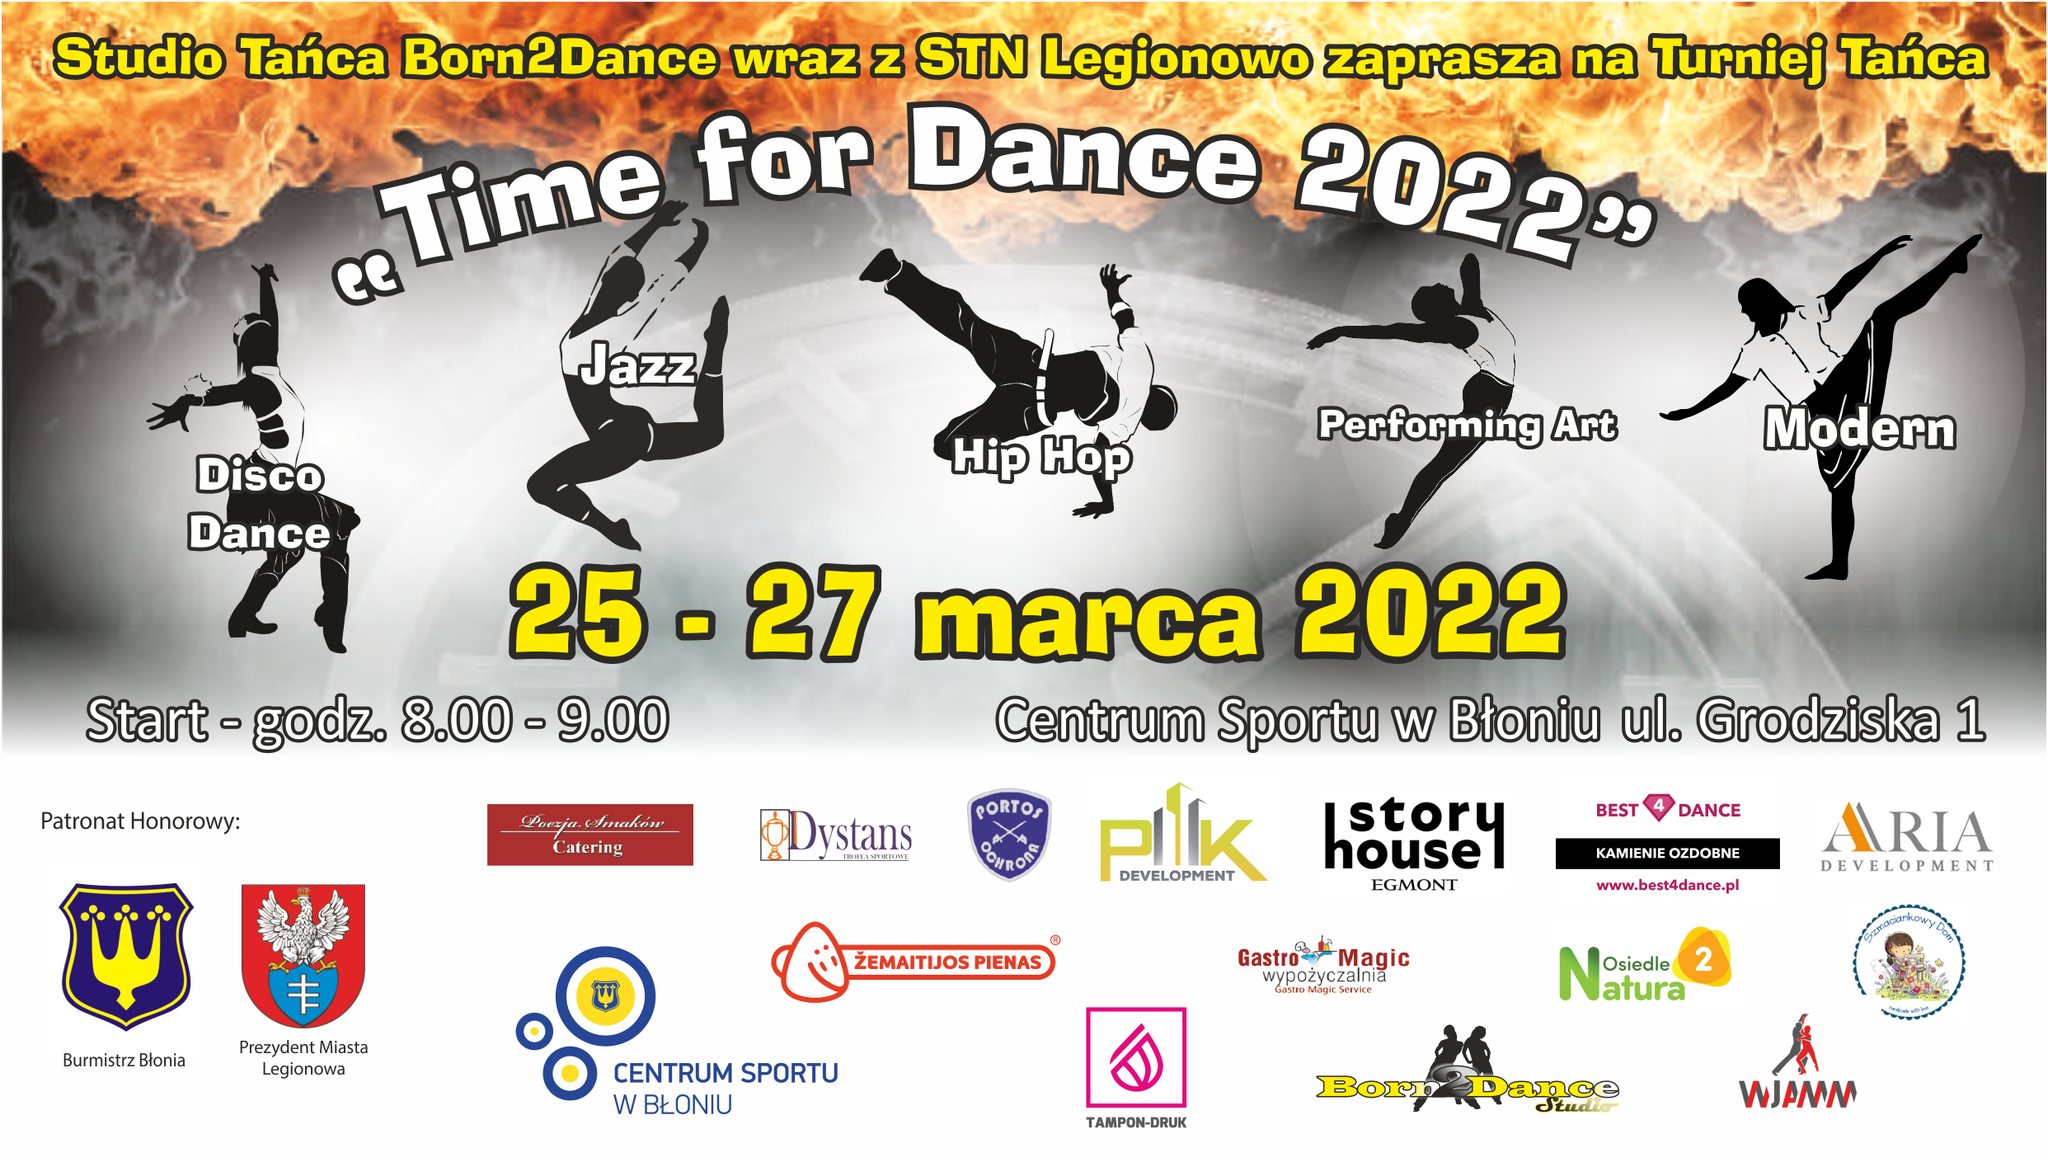 time for dance 2022